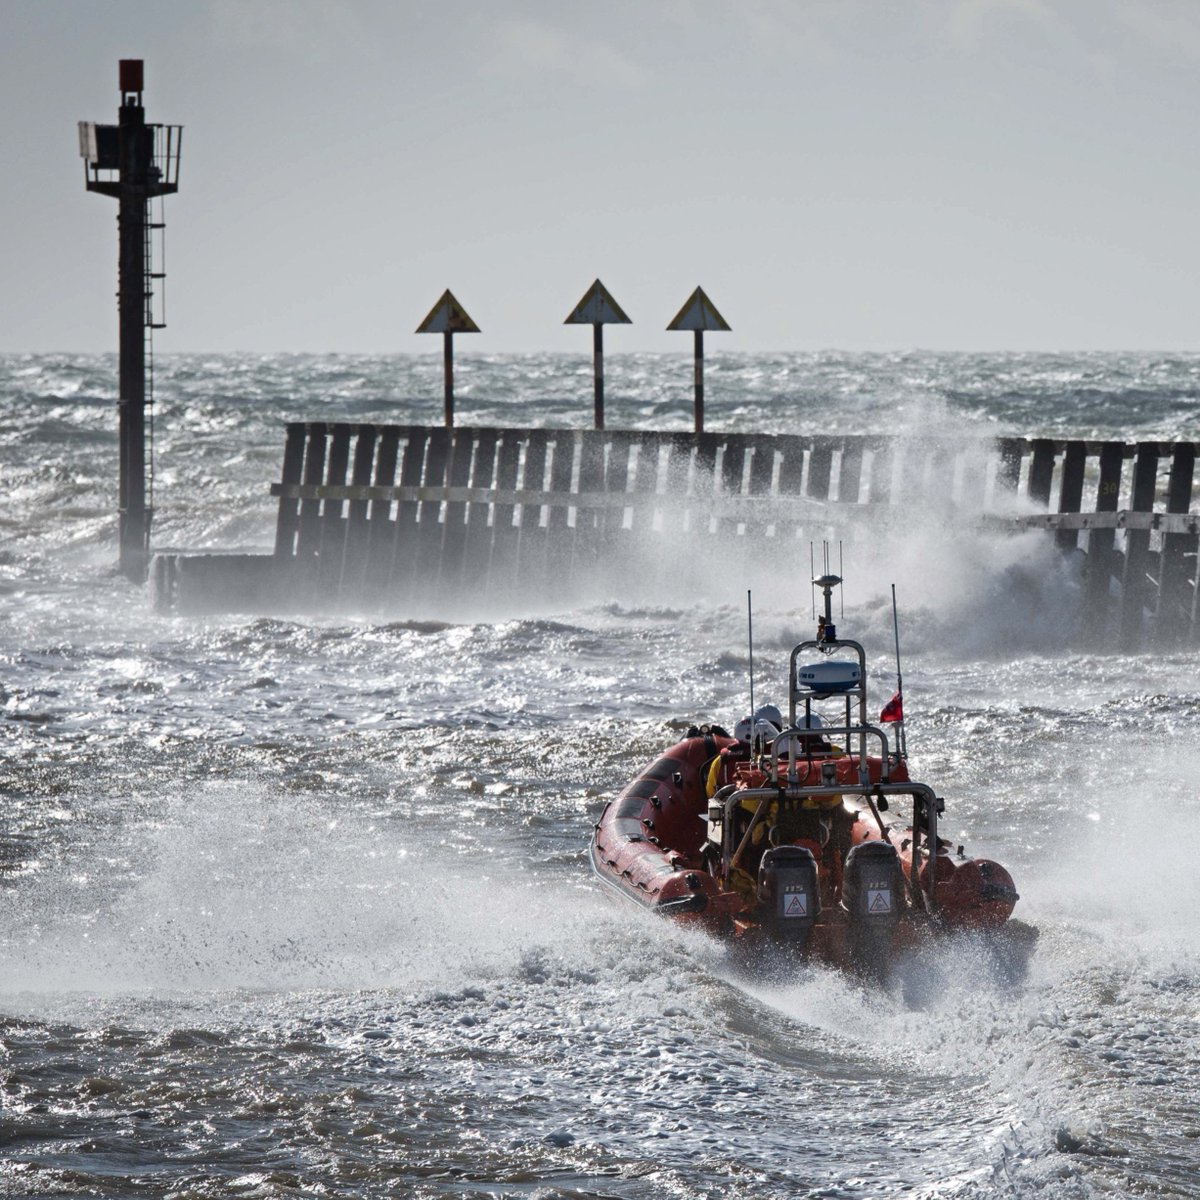 There’s just 36 hours left to bid on the amazing lots in our online auction! ⏰ Lots include a private box at the Utilita Bowl for up to 15 people to watch Hampshire v Northamptonshire on 26 July. 🤩 Happy bidding! rb.gy/fxm09l @RNLI #rnli200